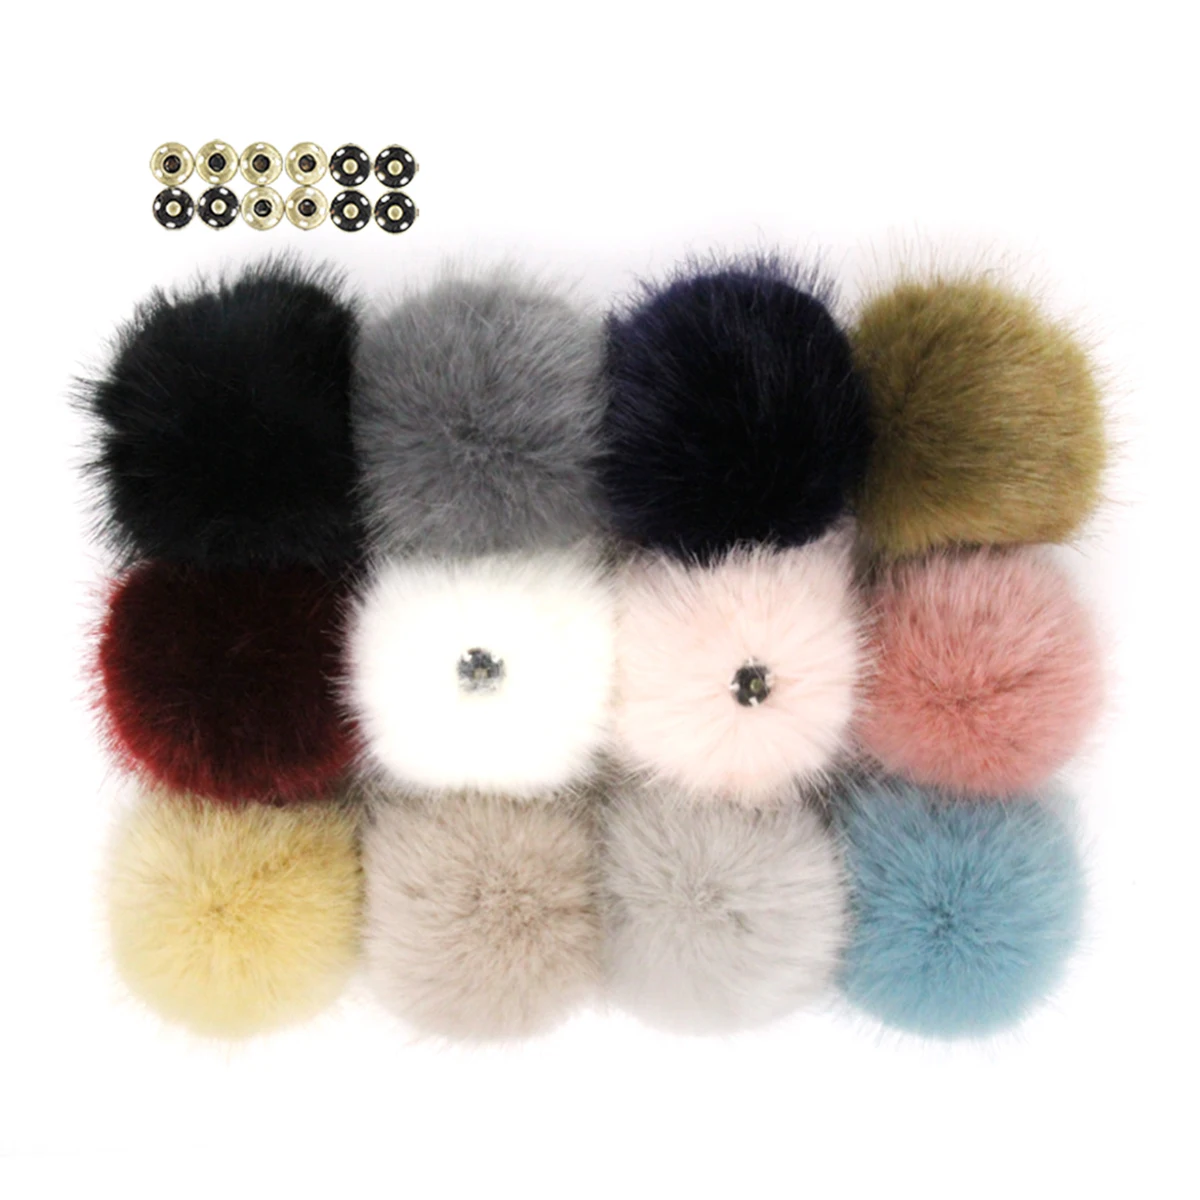 

Furling 12PC 10cm DIY Handmade Faux Mink Fur Pom Pom Ball With Buttons for Beanie Hats Crafts Keychain Key Ring Accessories